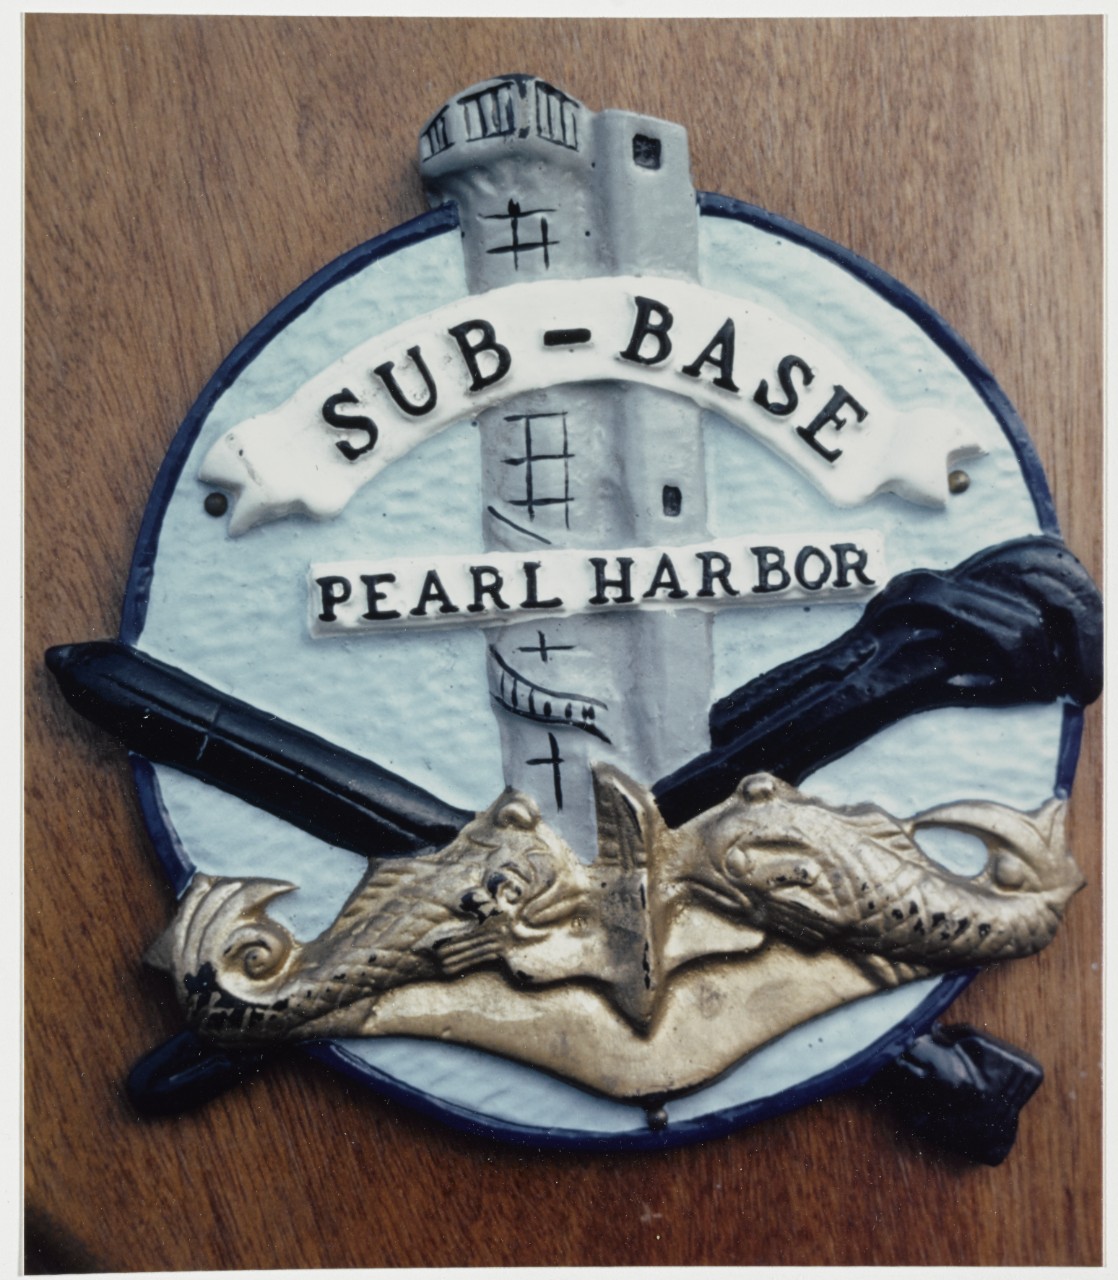 Insignia: Submarine Base, Pearl Harbor, Hawaii. Plaque received in 1965.